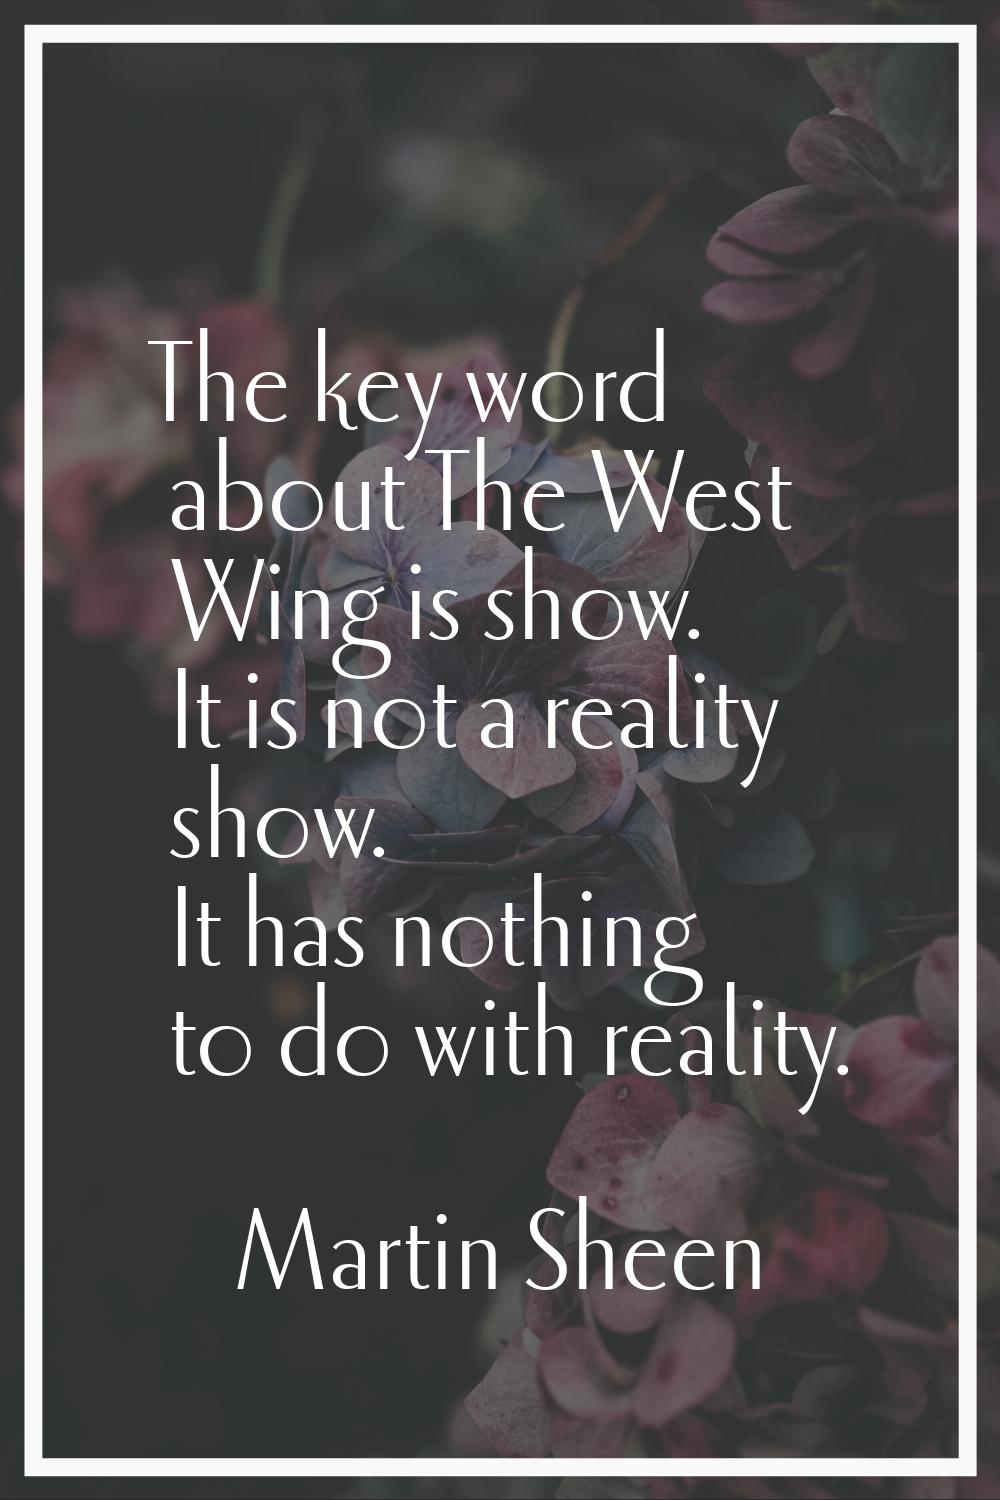 The key word about The West Wing is show. It is not a reality show. It has nothing to do with reali